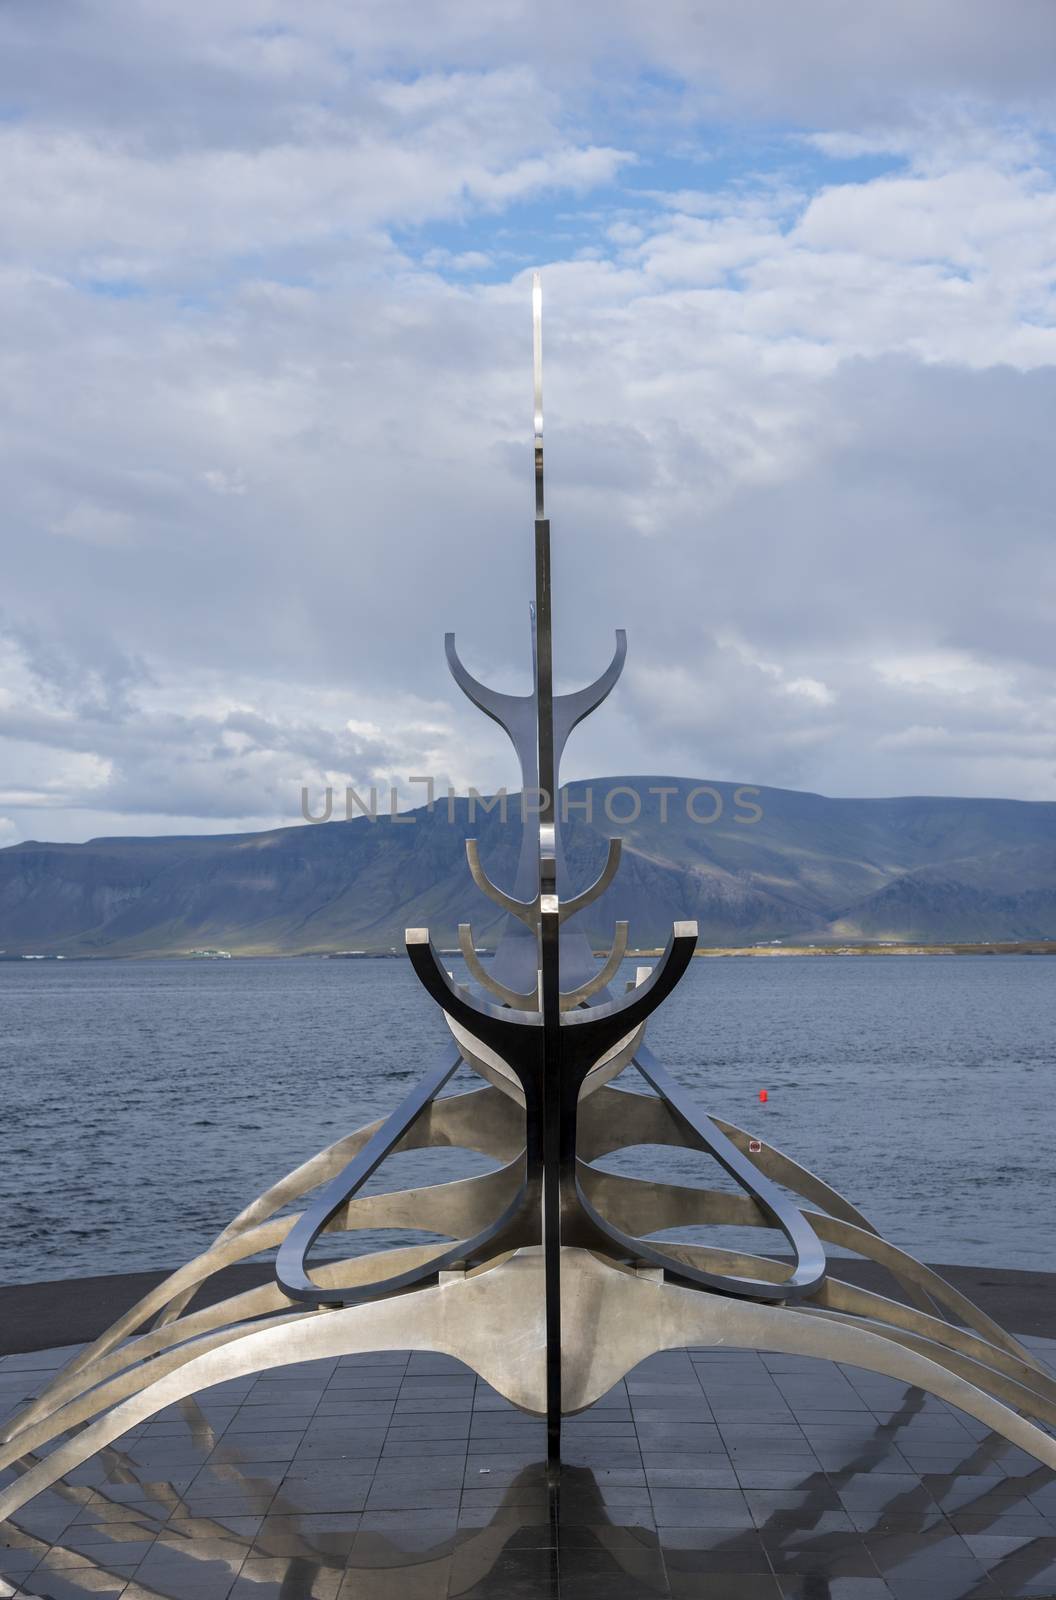 The Sun Voyager Monument, Reykjavik, Iceland by MichaelMou85